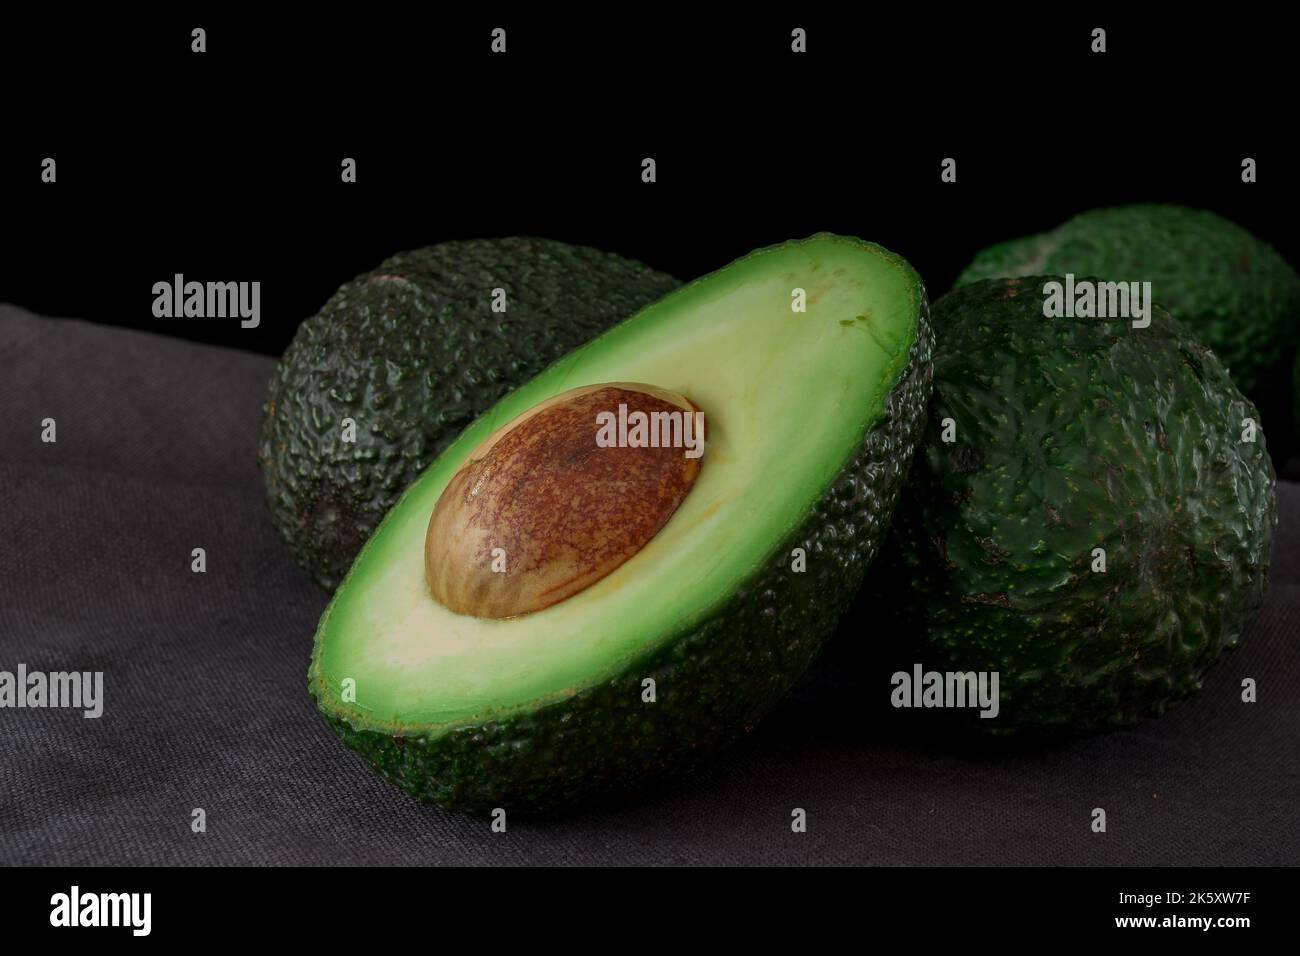 Persea americana fruit cut into two with seed, Avocado Stock Photo